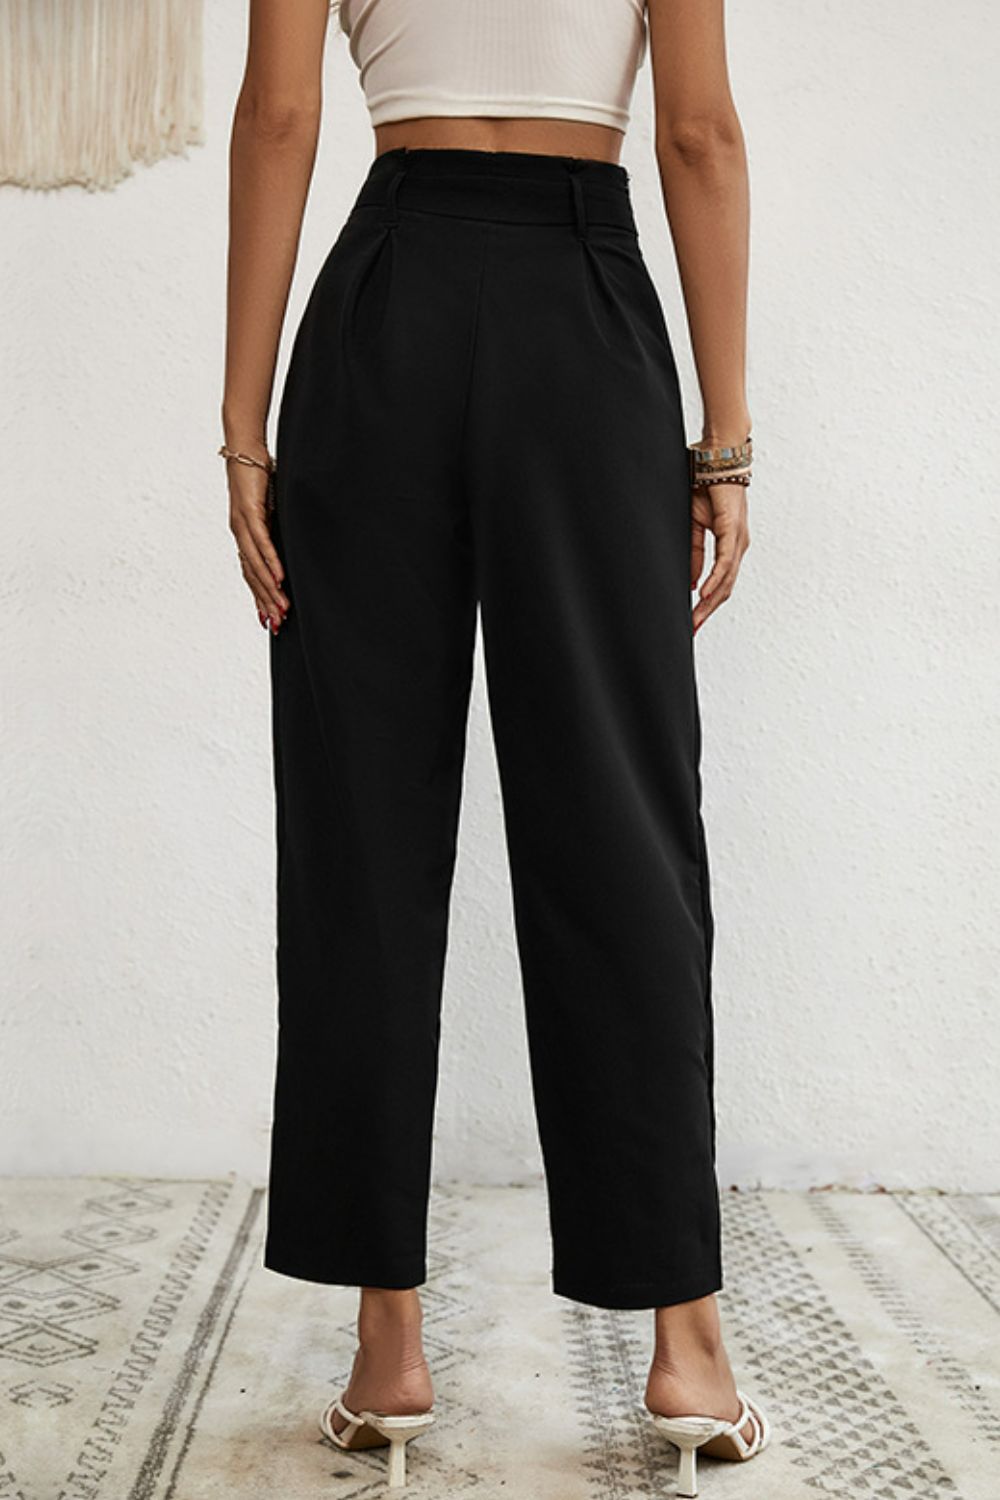 Buttoned Tie-Waist Cropped Pants - Bottoms - Pants - 2 - 2024